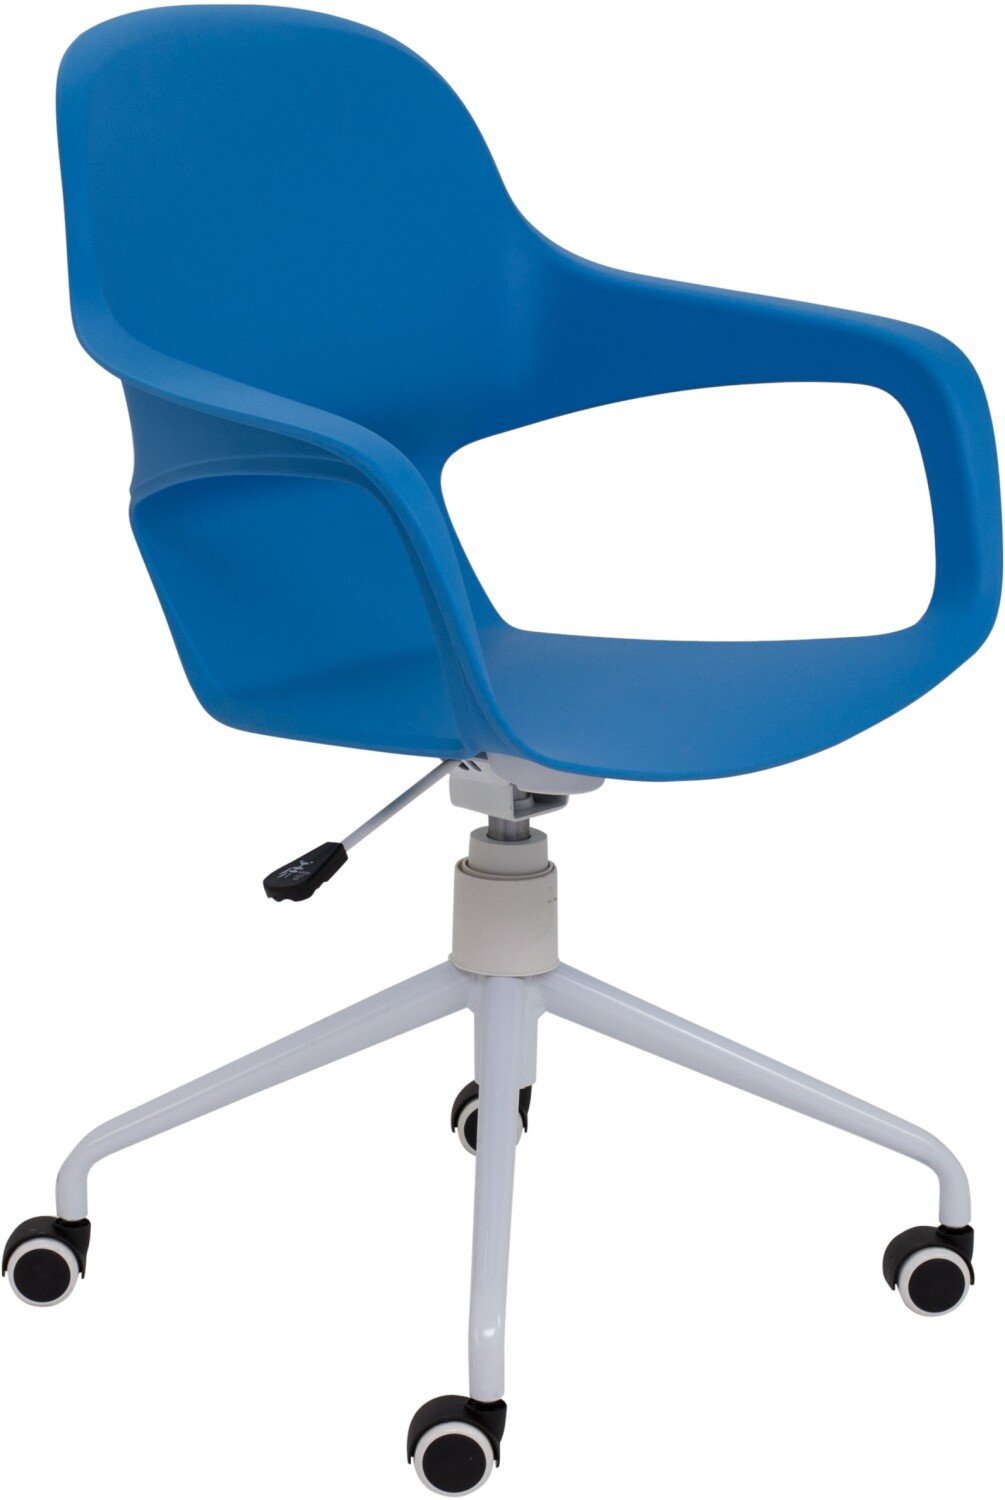 tc office ariel ii spider base chair